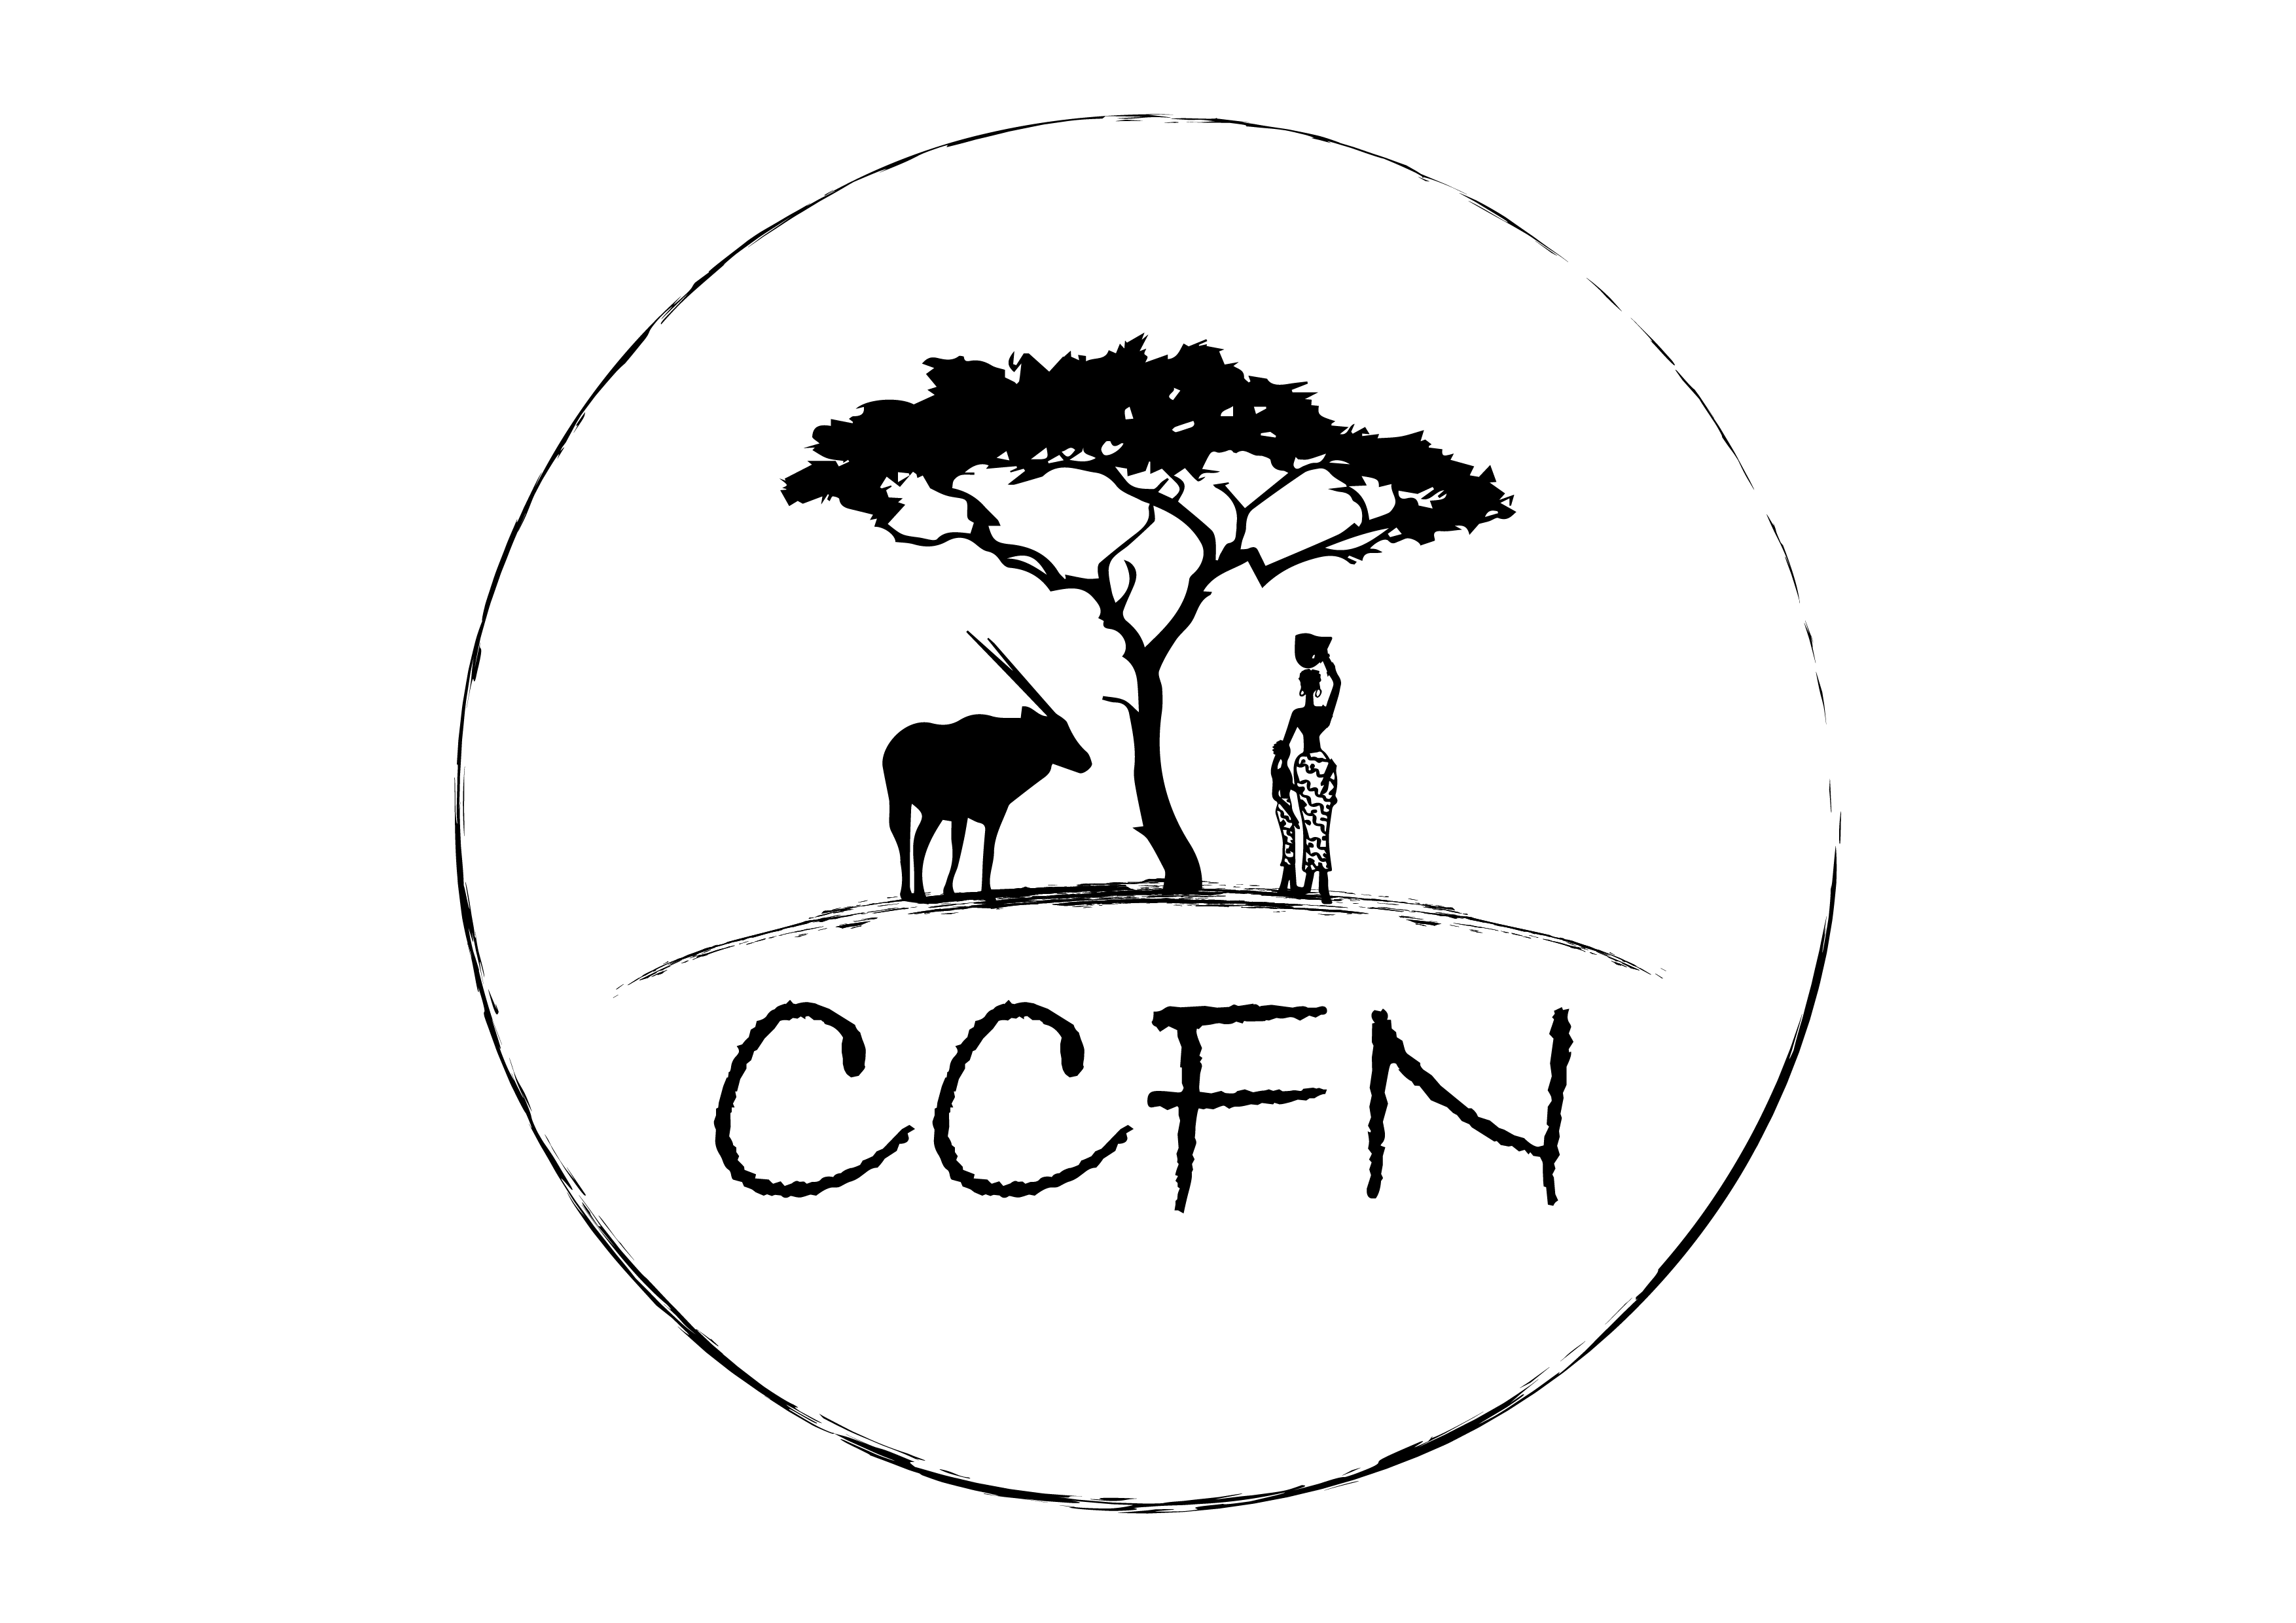 Community Conservation Fund of Namibia (CCFN)